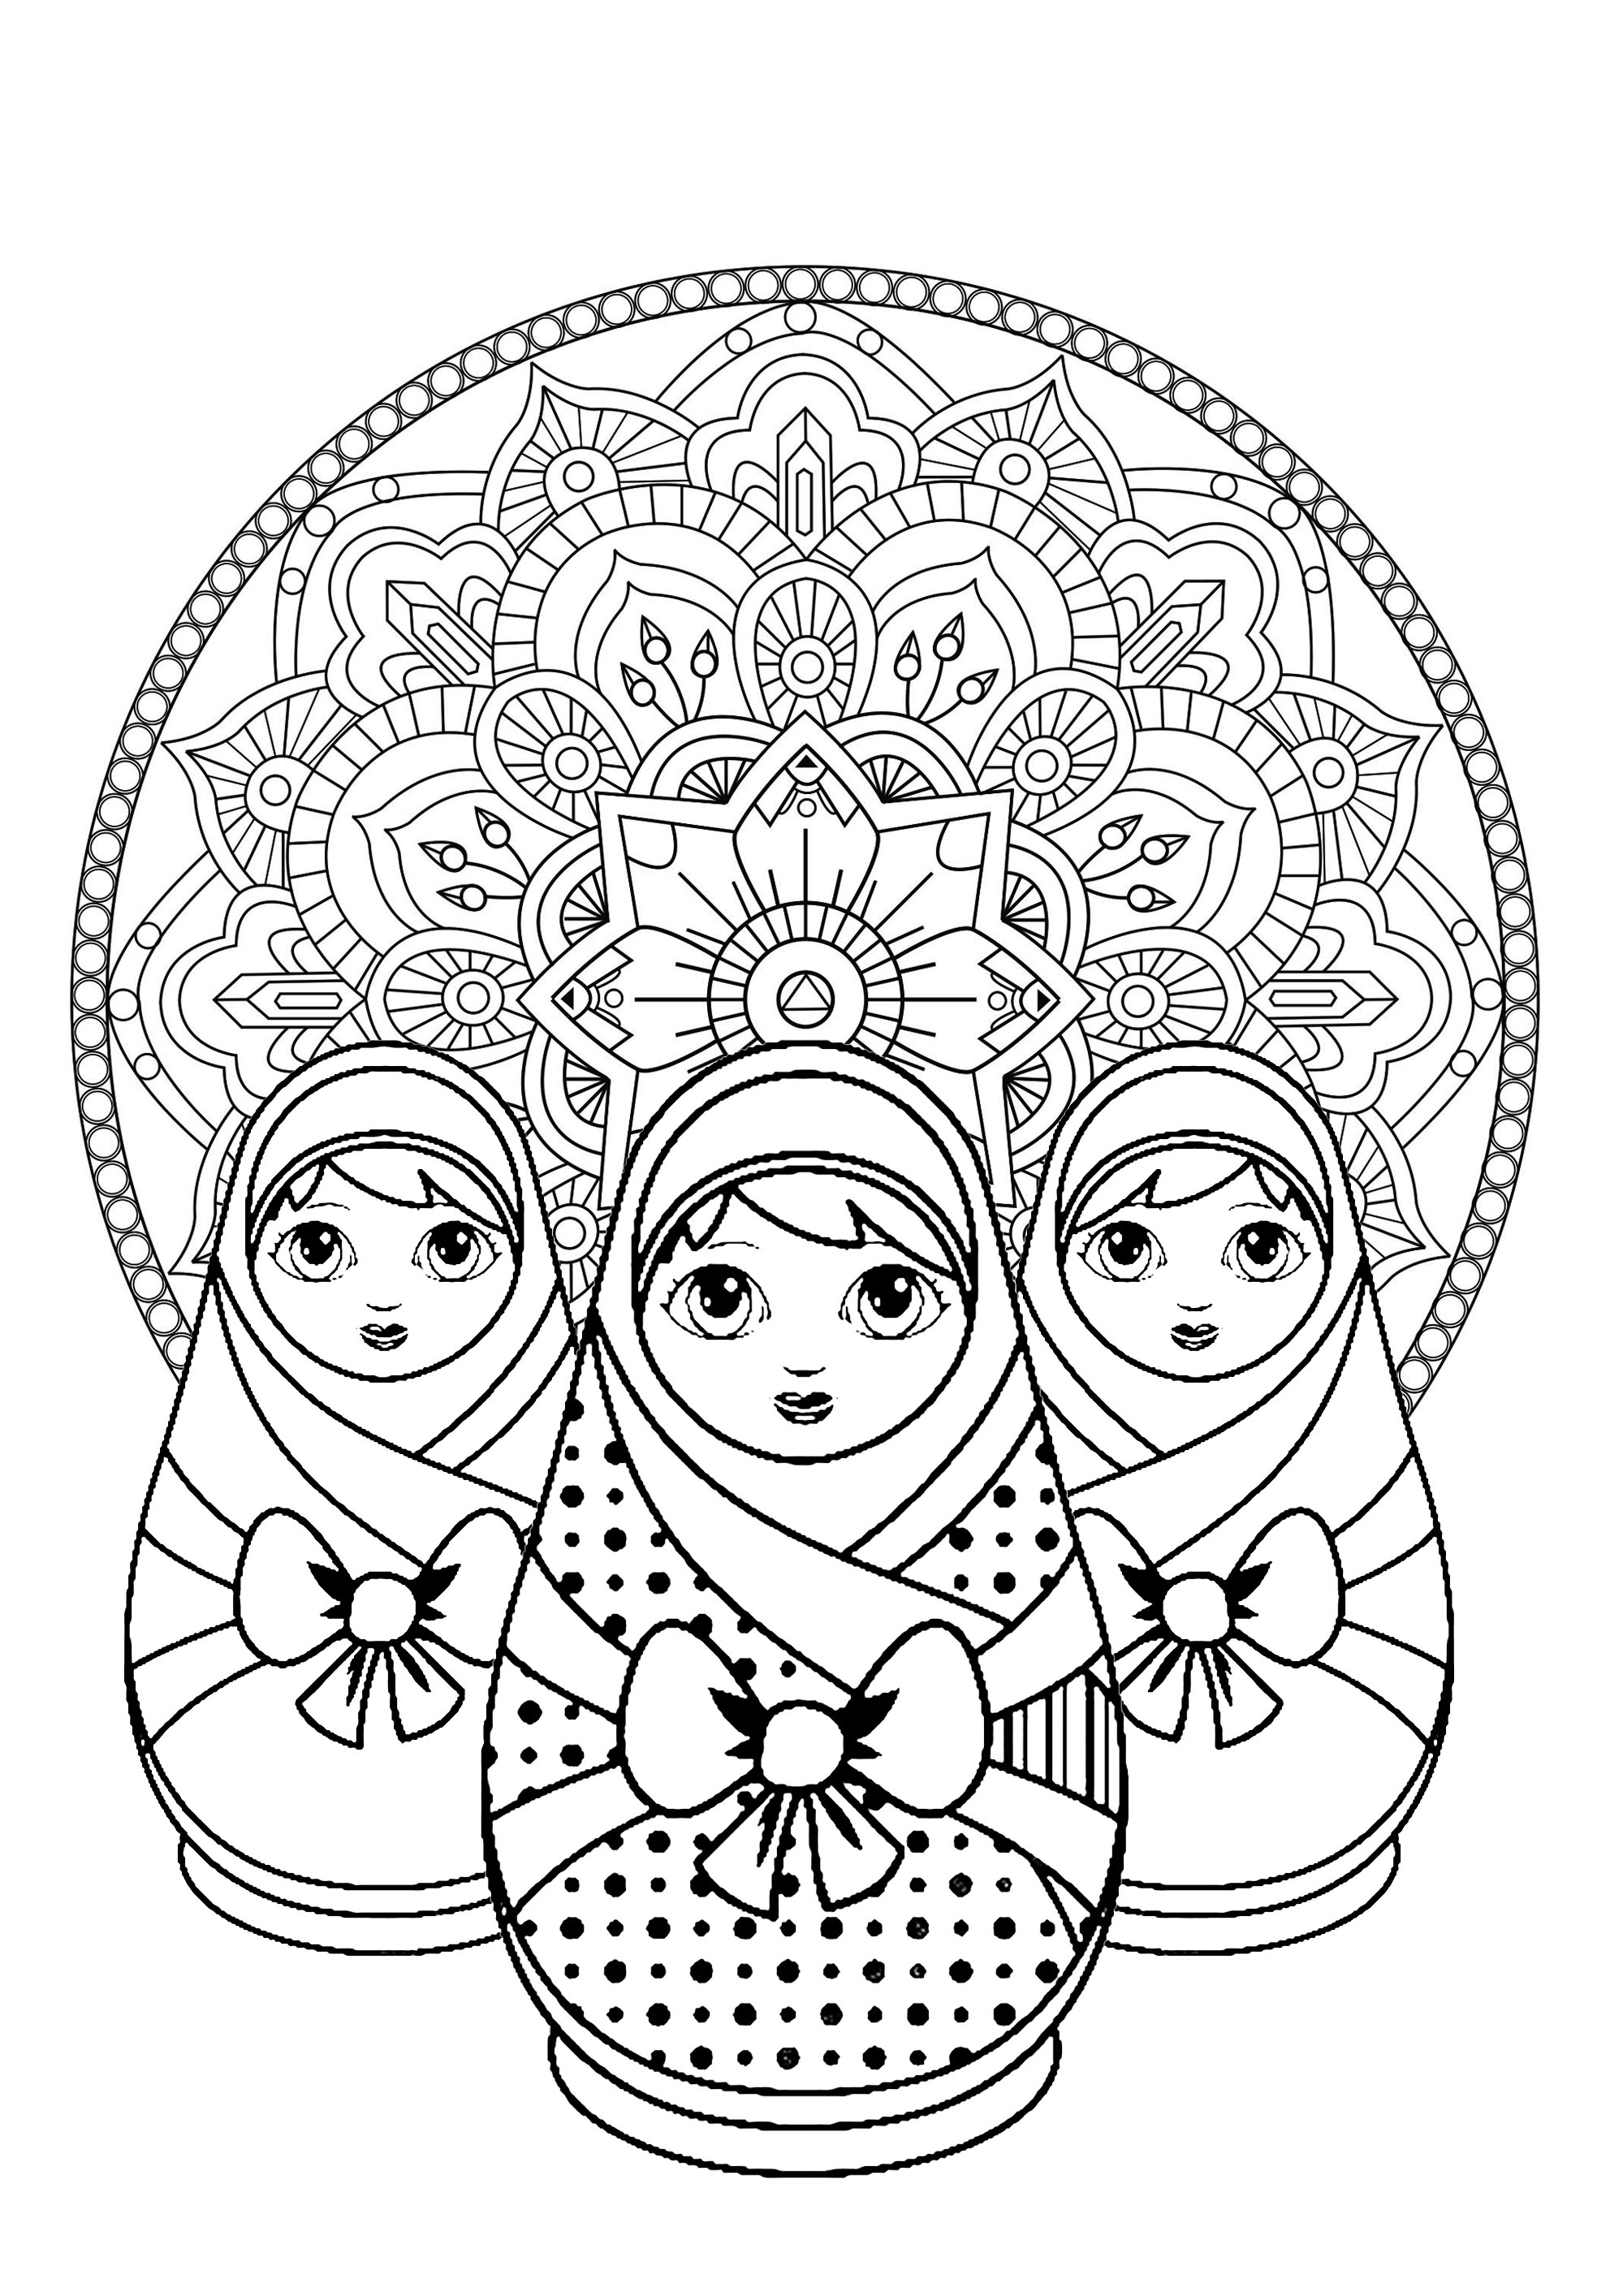 Color these cute russian dolls and incredible mandala in background, Artist : Art. Isabelle